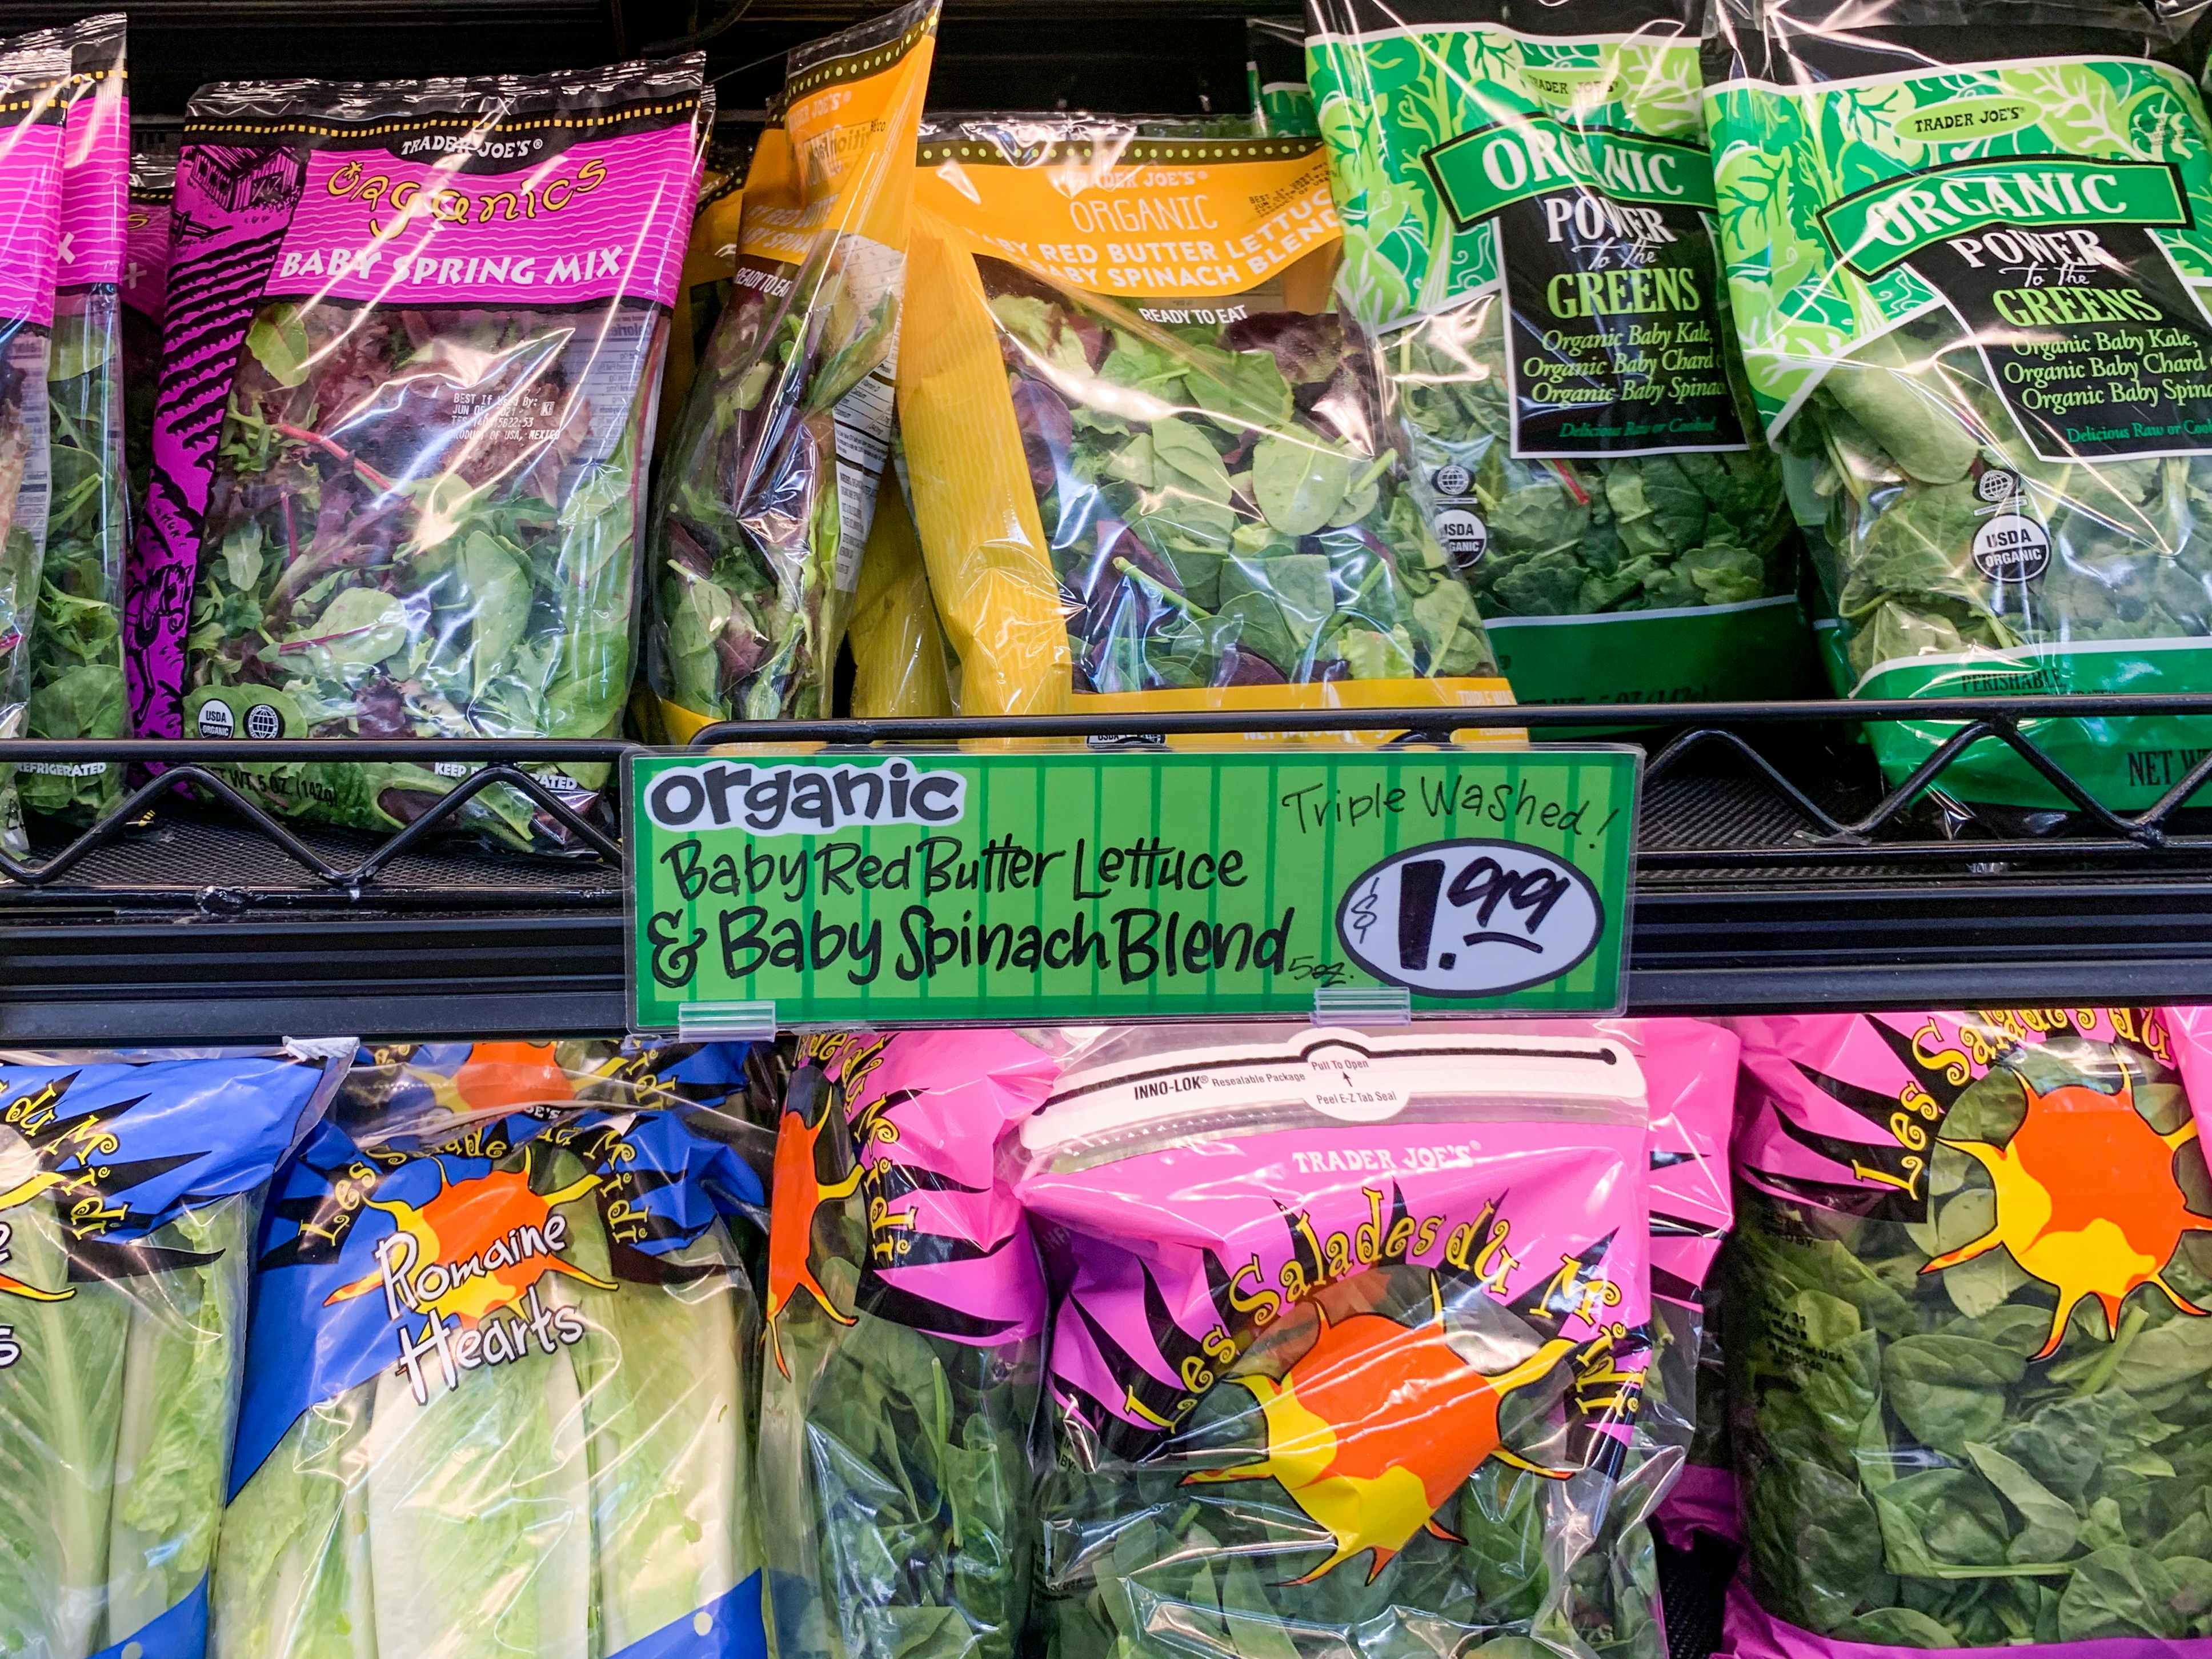 Organic spinach bags next to a $1.99 price tag